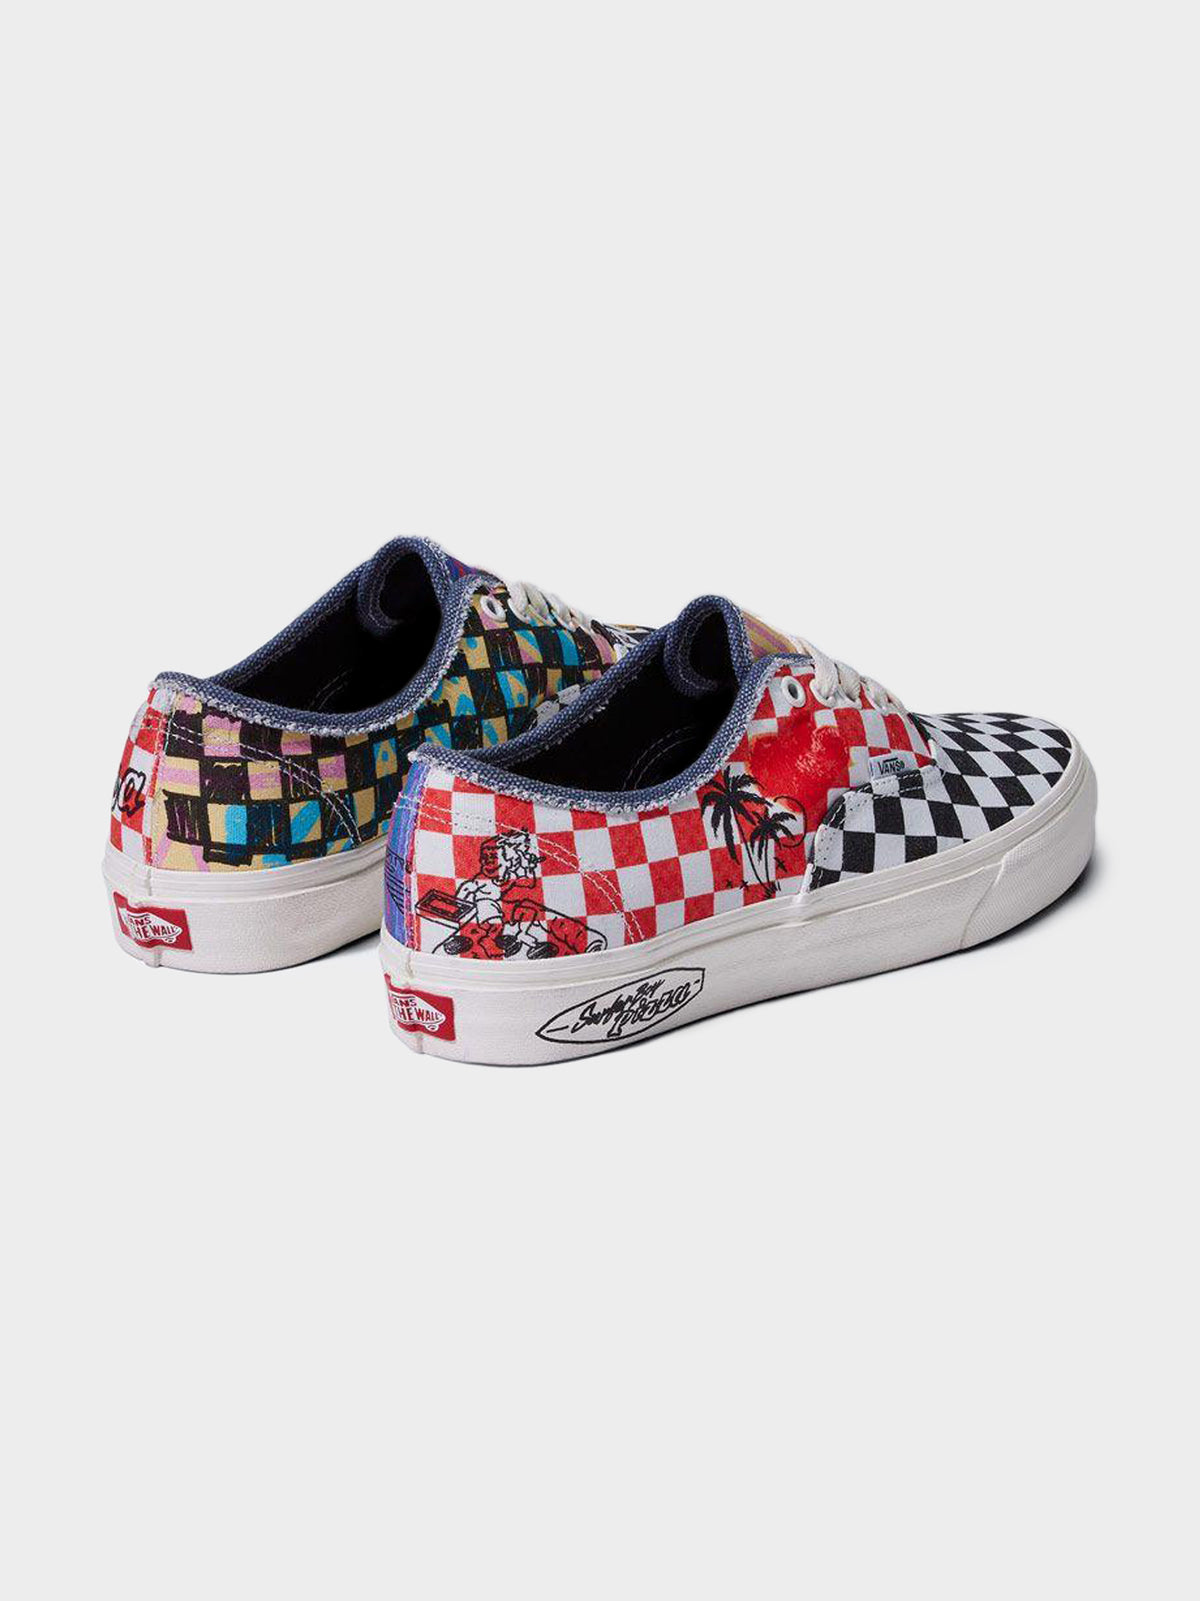 Unisex Stranger Things Authentic Sneakers in Black &amp; Red Checkerboard